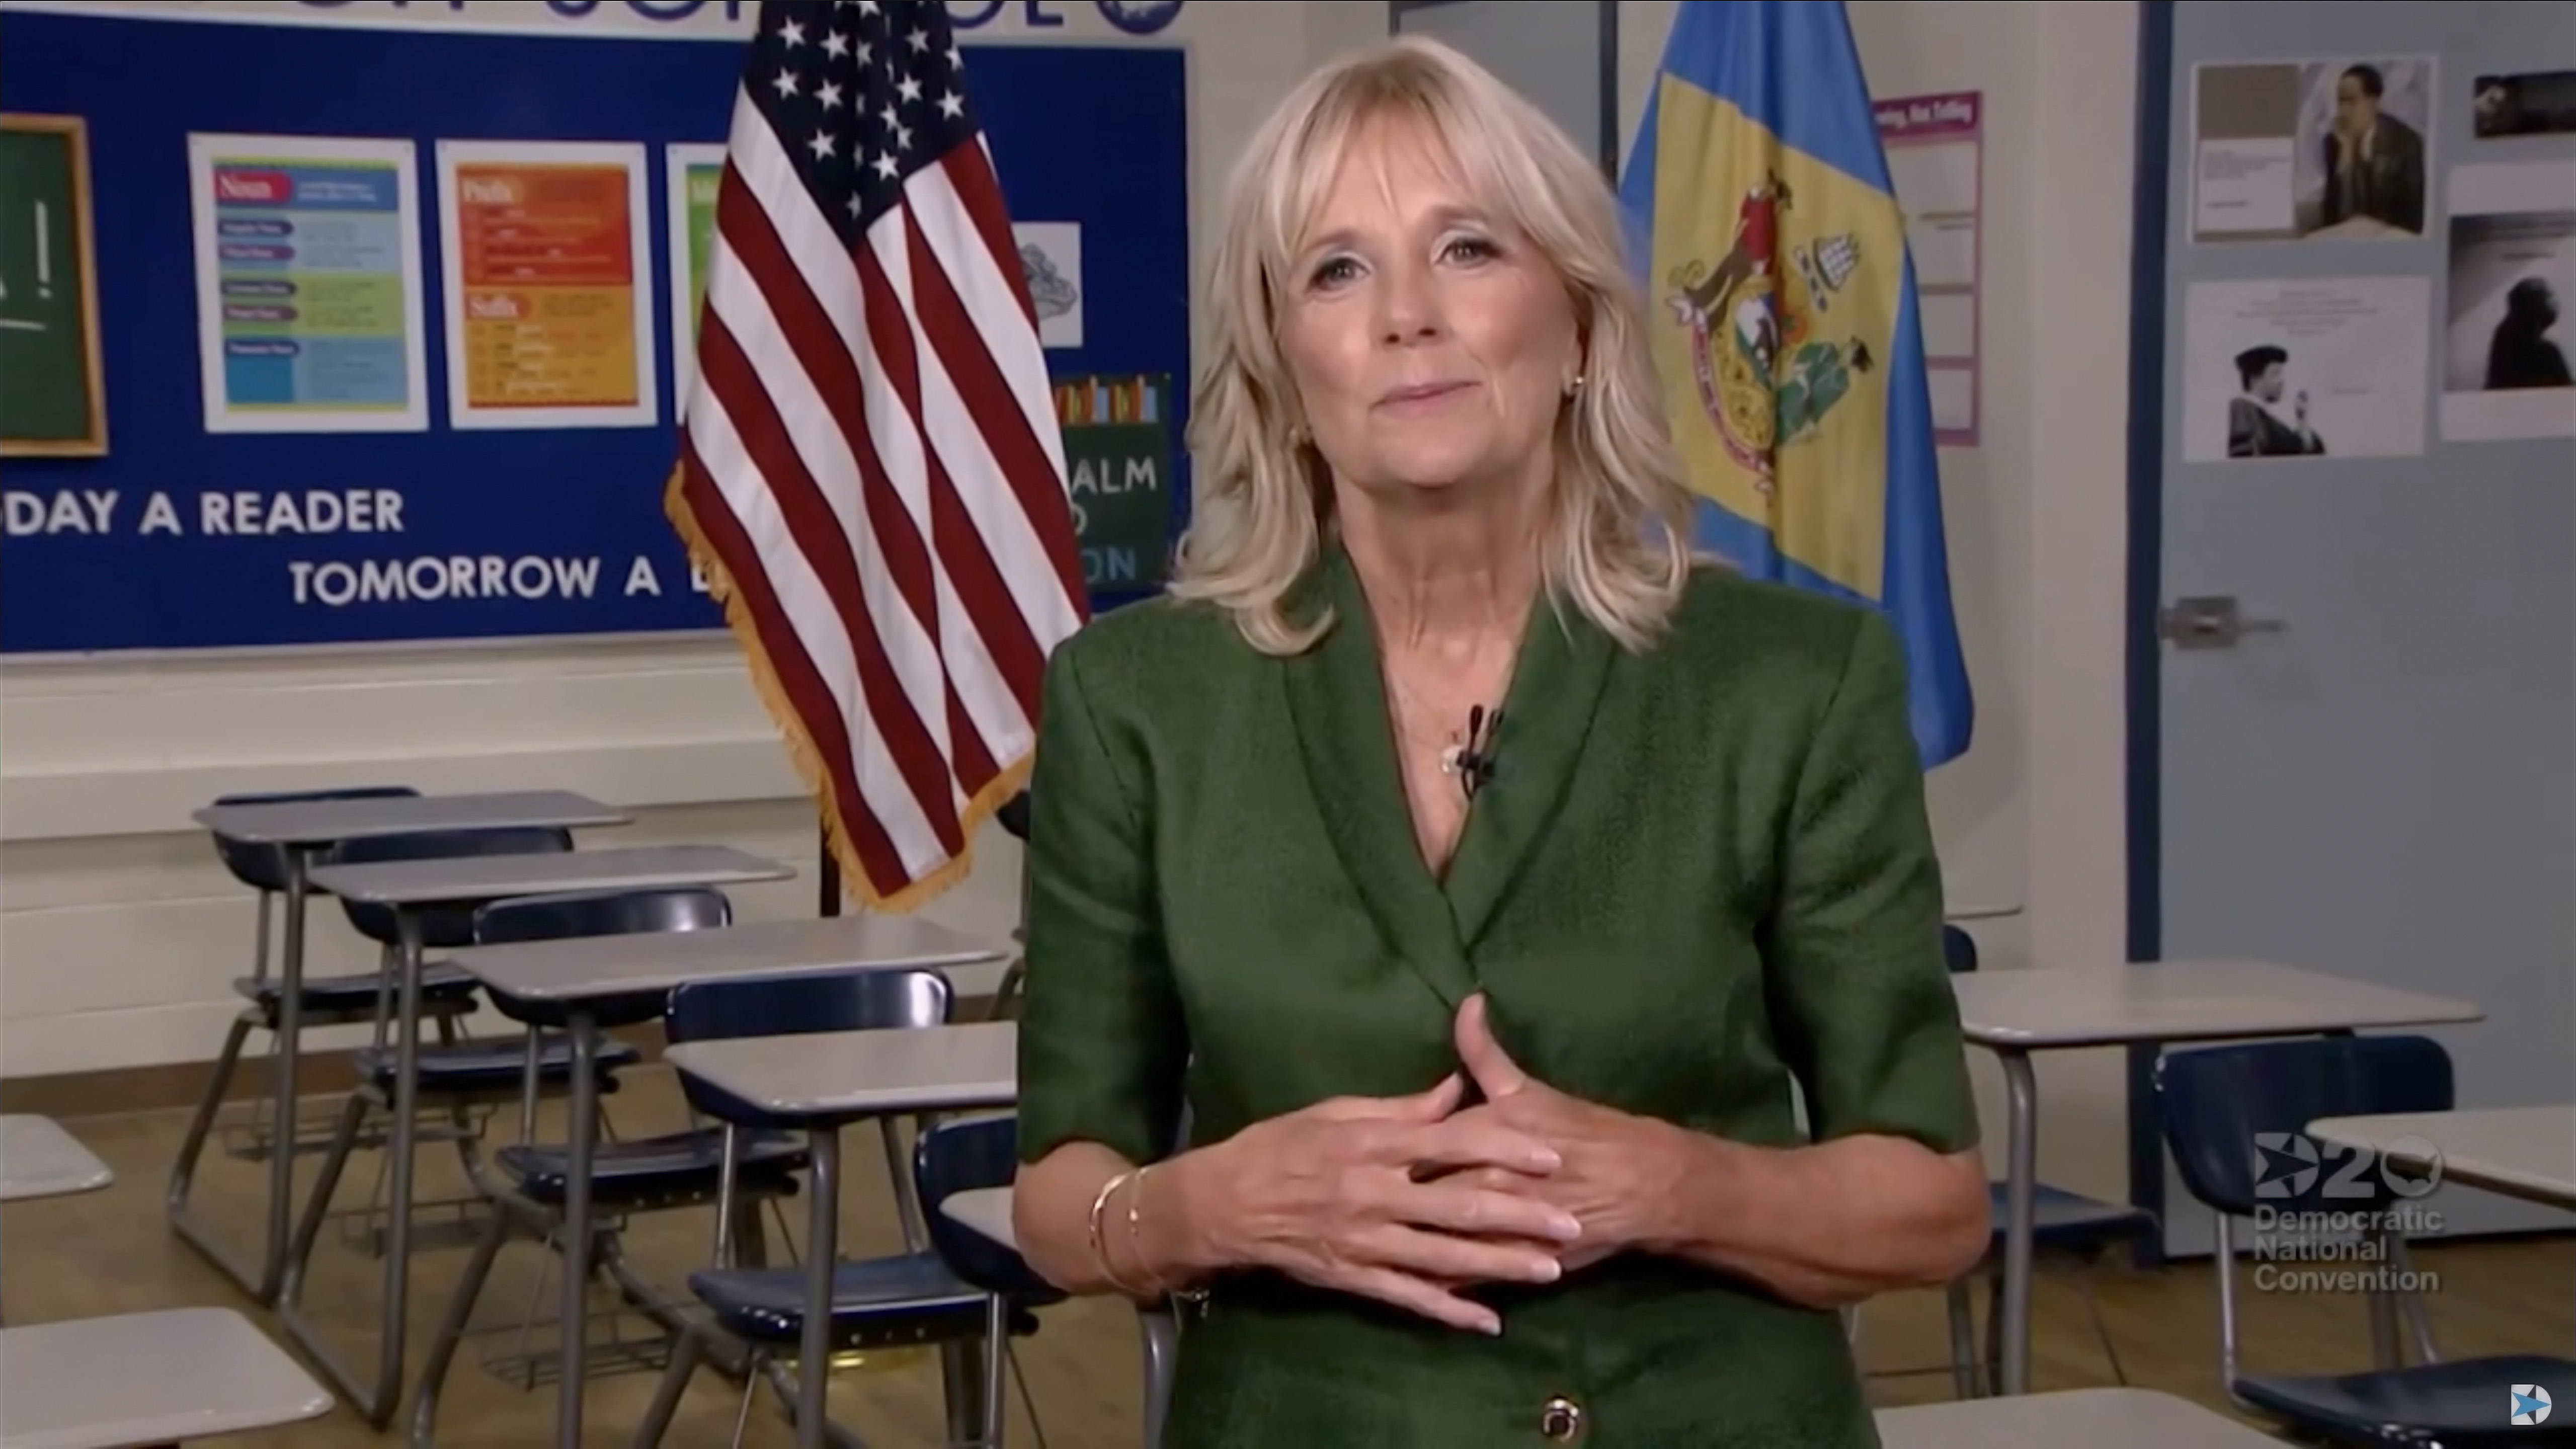 In this screenshot from the DNCC’s livestream of the 2020 Democratic National Convention, Former U.S. Second Lady Dr. Jill Biden addresses from a classroom the virtual convention on August 18, 2020. (Handout/DNCC via Getty Images)